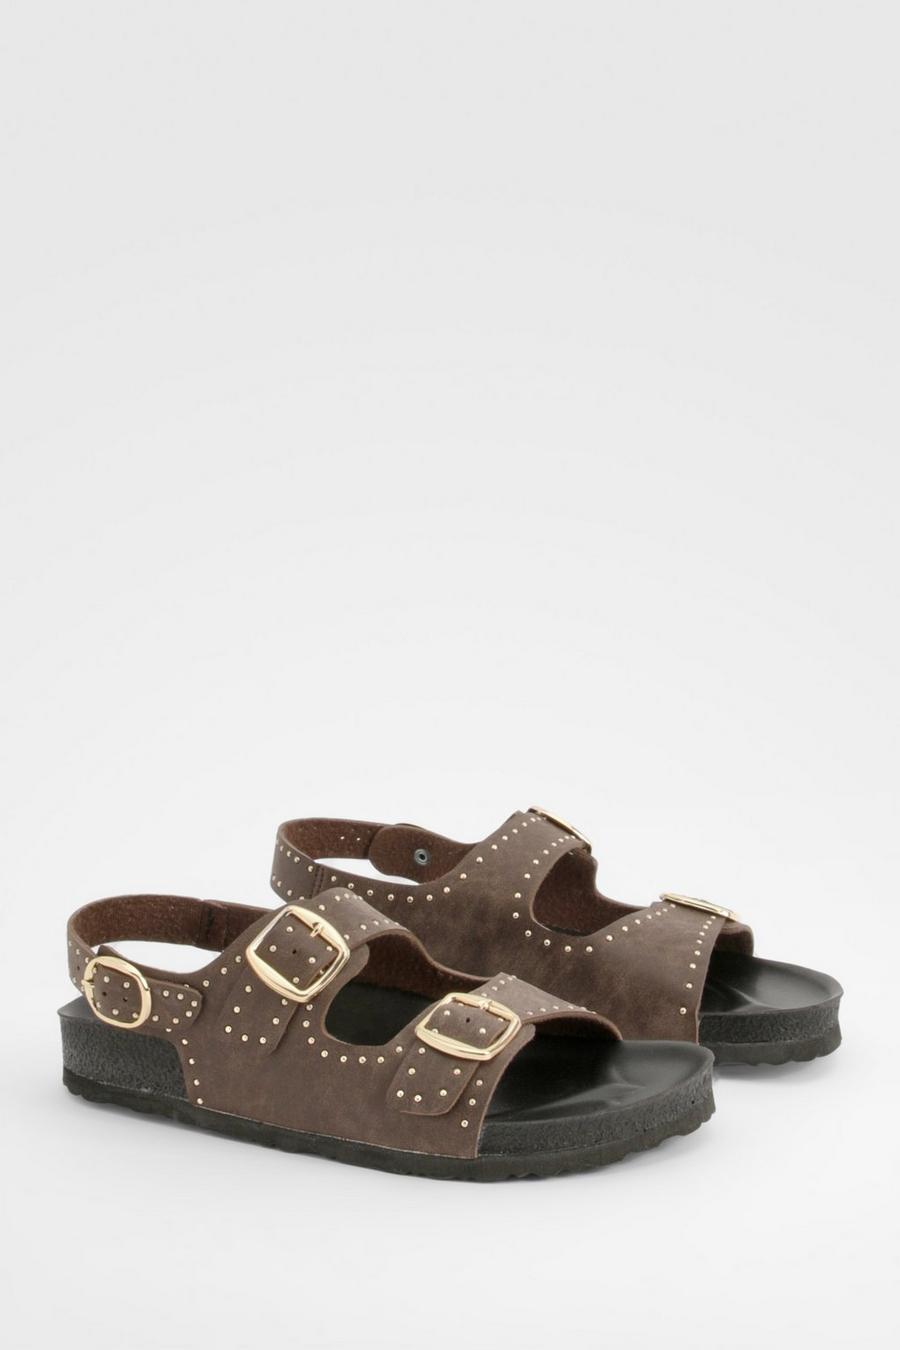 Chocolate Burnished Pu Studded Double Strap Dad Sandals